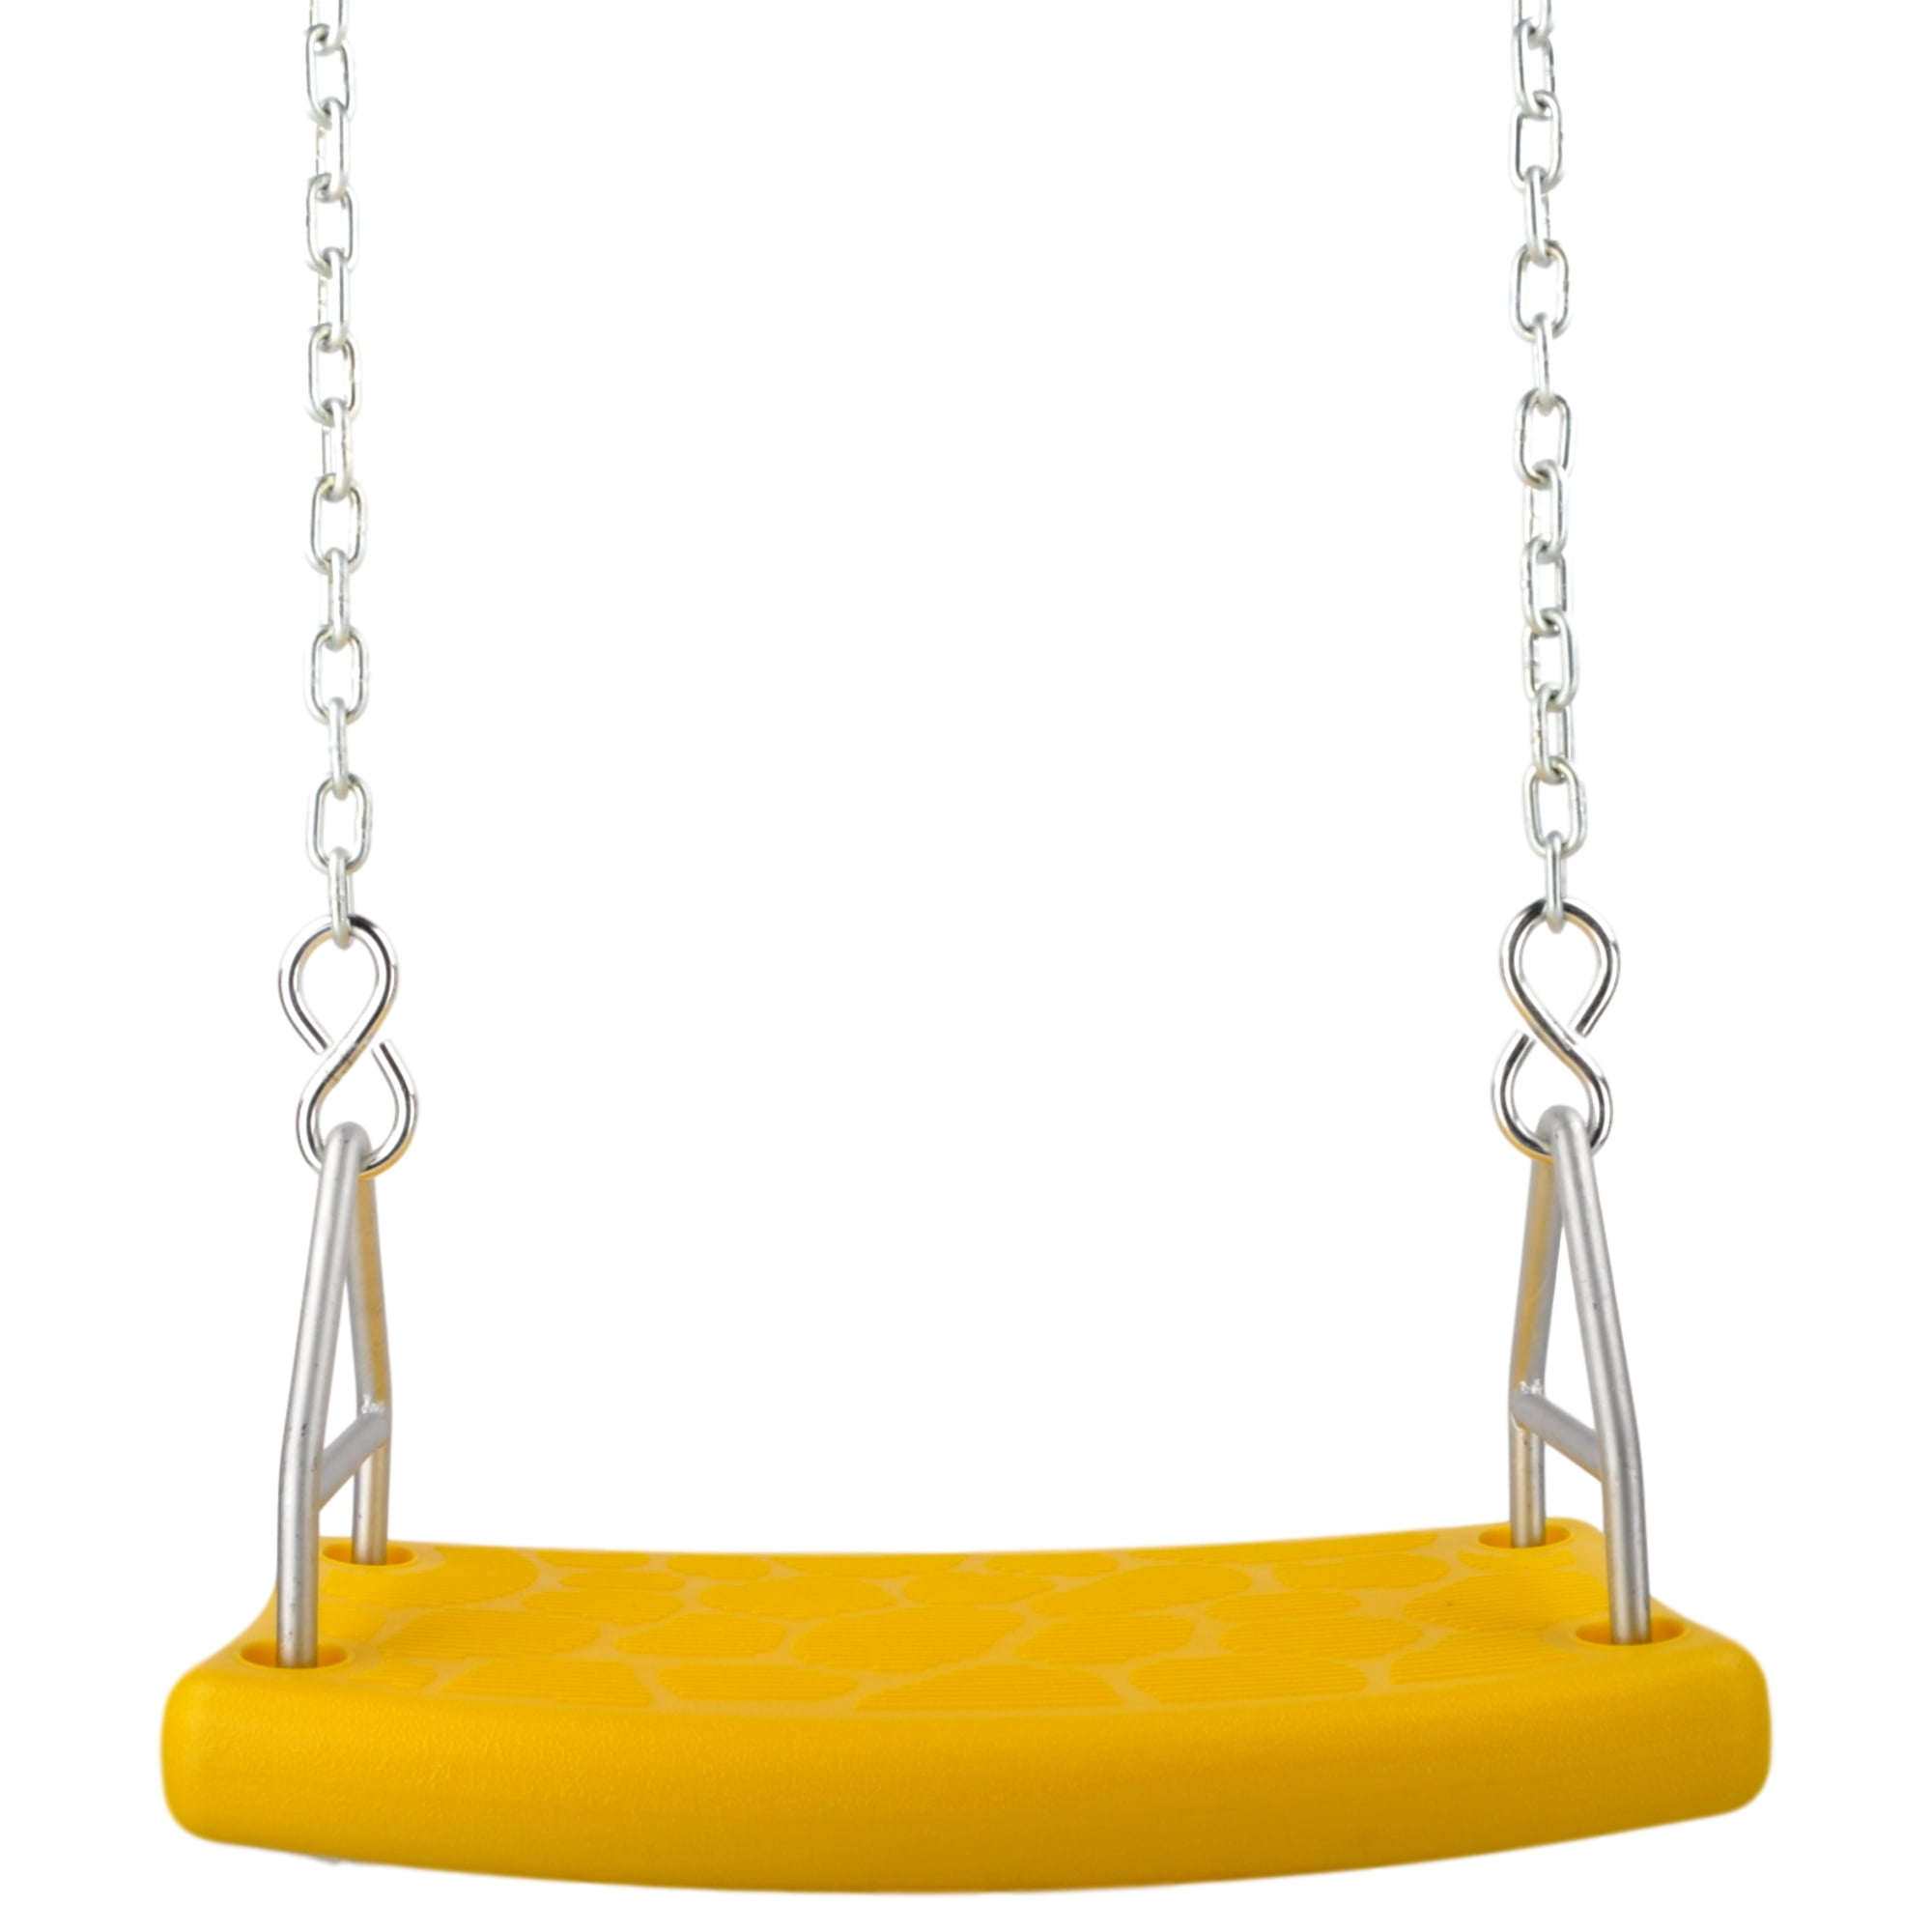 Swing Set Stuff Inc Glider with Coated Chains & SSS Logo Sticker Playground Attachment Yellow 